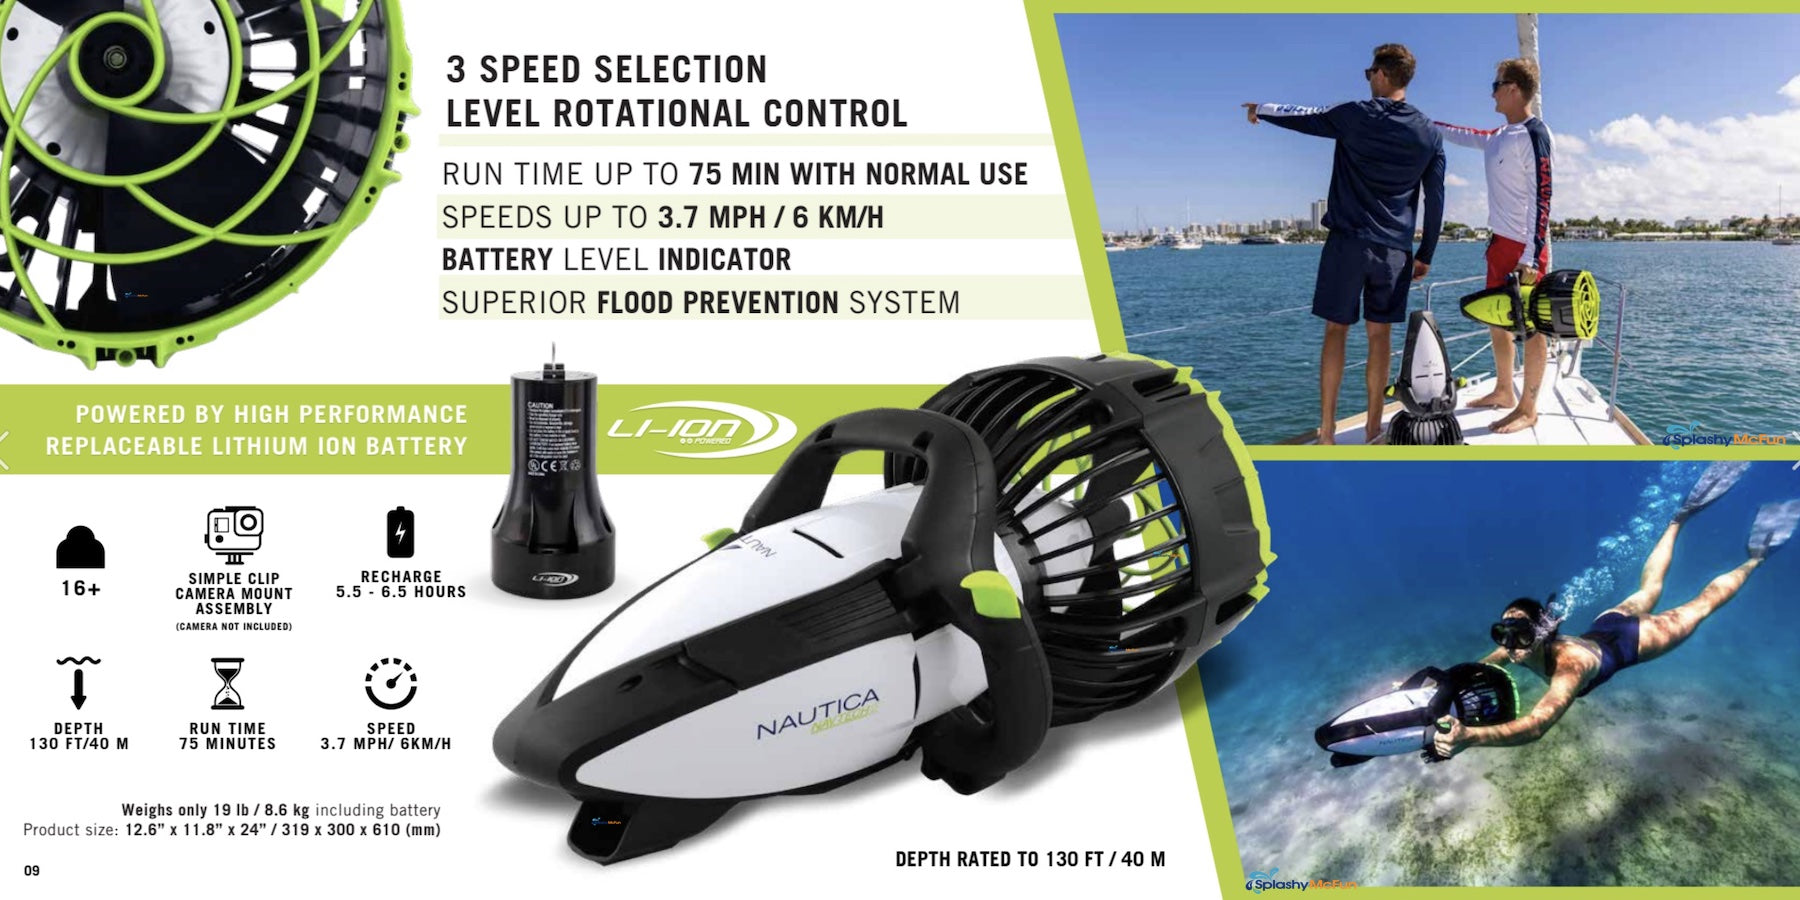 There are 2 images of a boy diving with the Nautica Navtech 2 Sea Scooter and a closeup side view of the dive scooter. Show that it has 75 minutes of runtime, 3.7 mph speed, and battery level indicator.